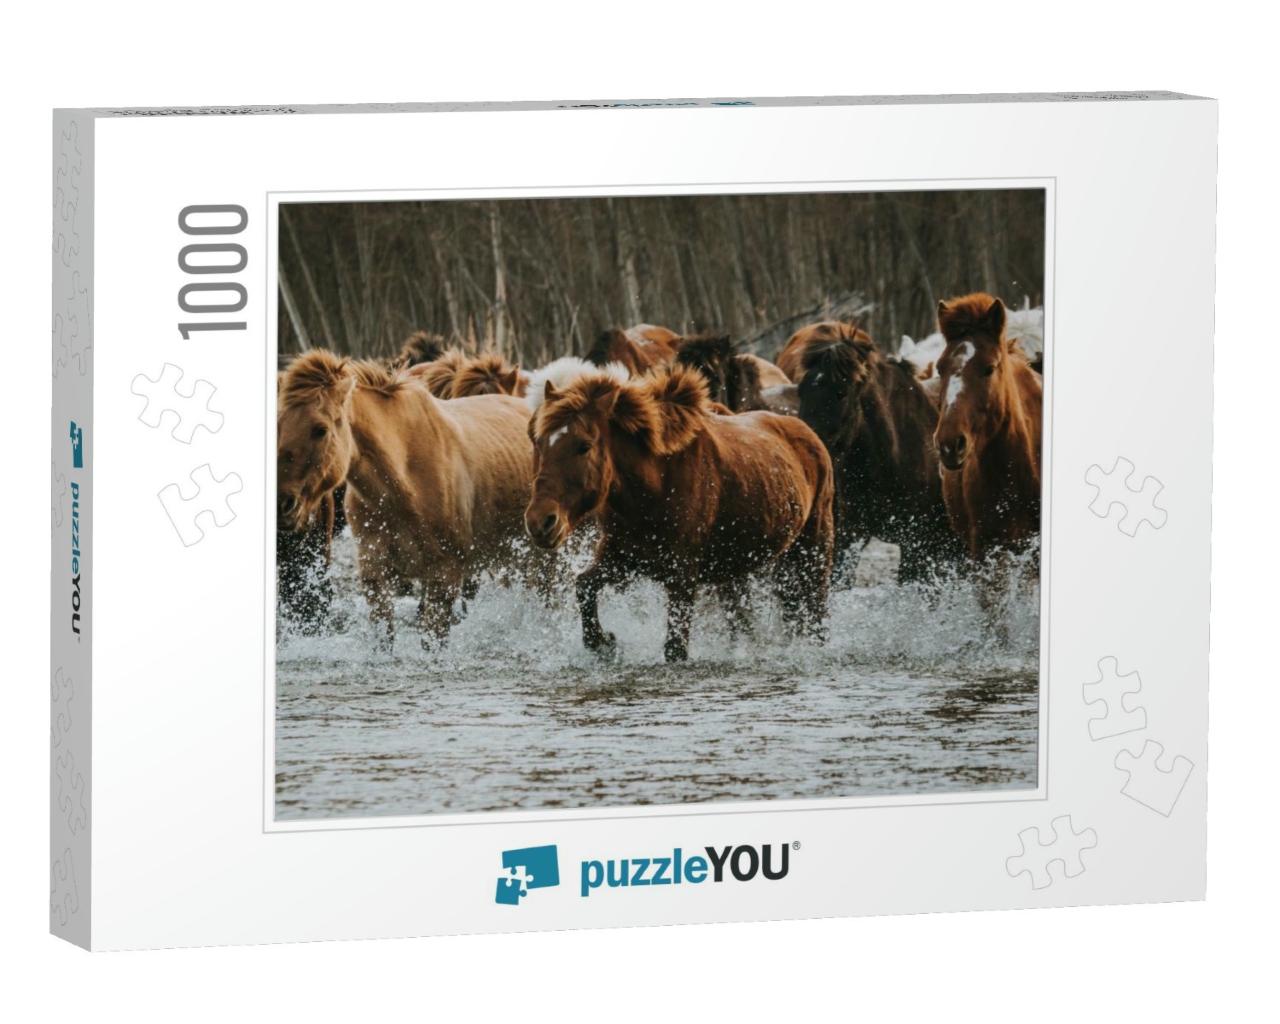 Large Group of Shaggy Brown & White Horses in Arboreal Wo... Jigsaw Puzzle with 1000 pieces